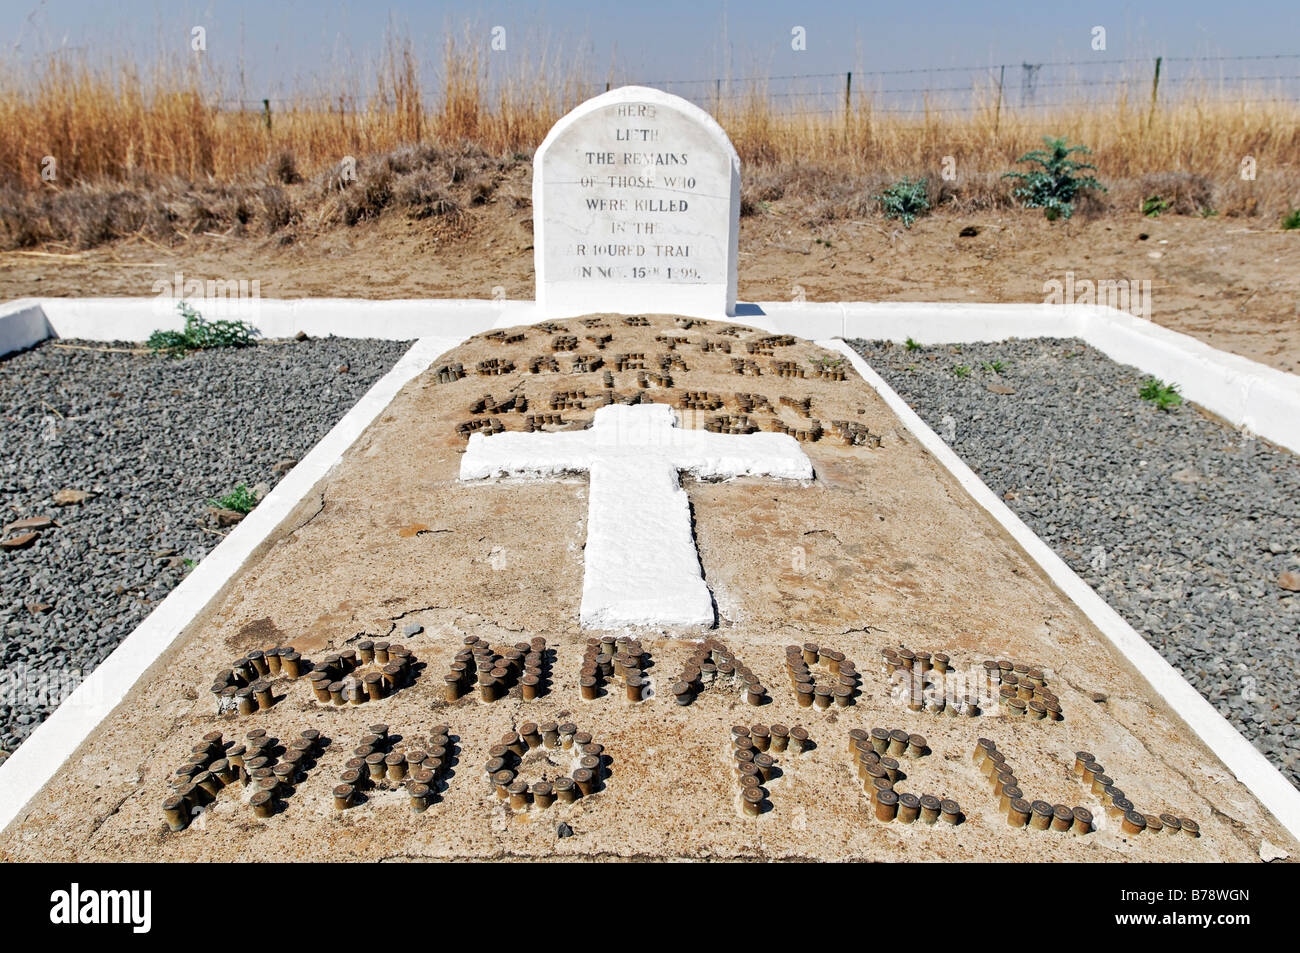 Inscription made of cartridge shells on a grave to the unknown soldiers of the Boer War, Kwazulu-Natal, South Africa, Africa Stock Photo